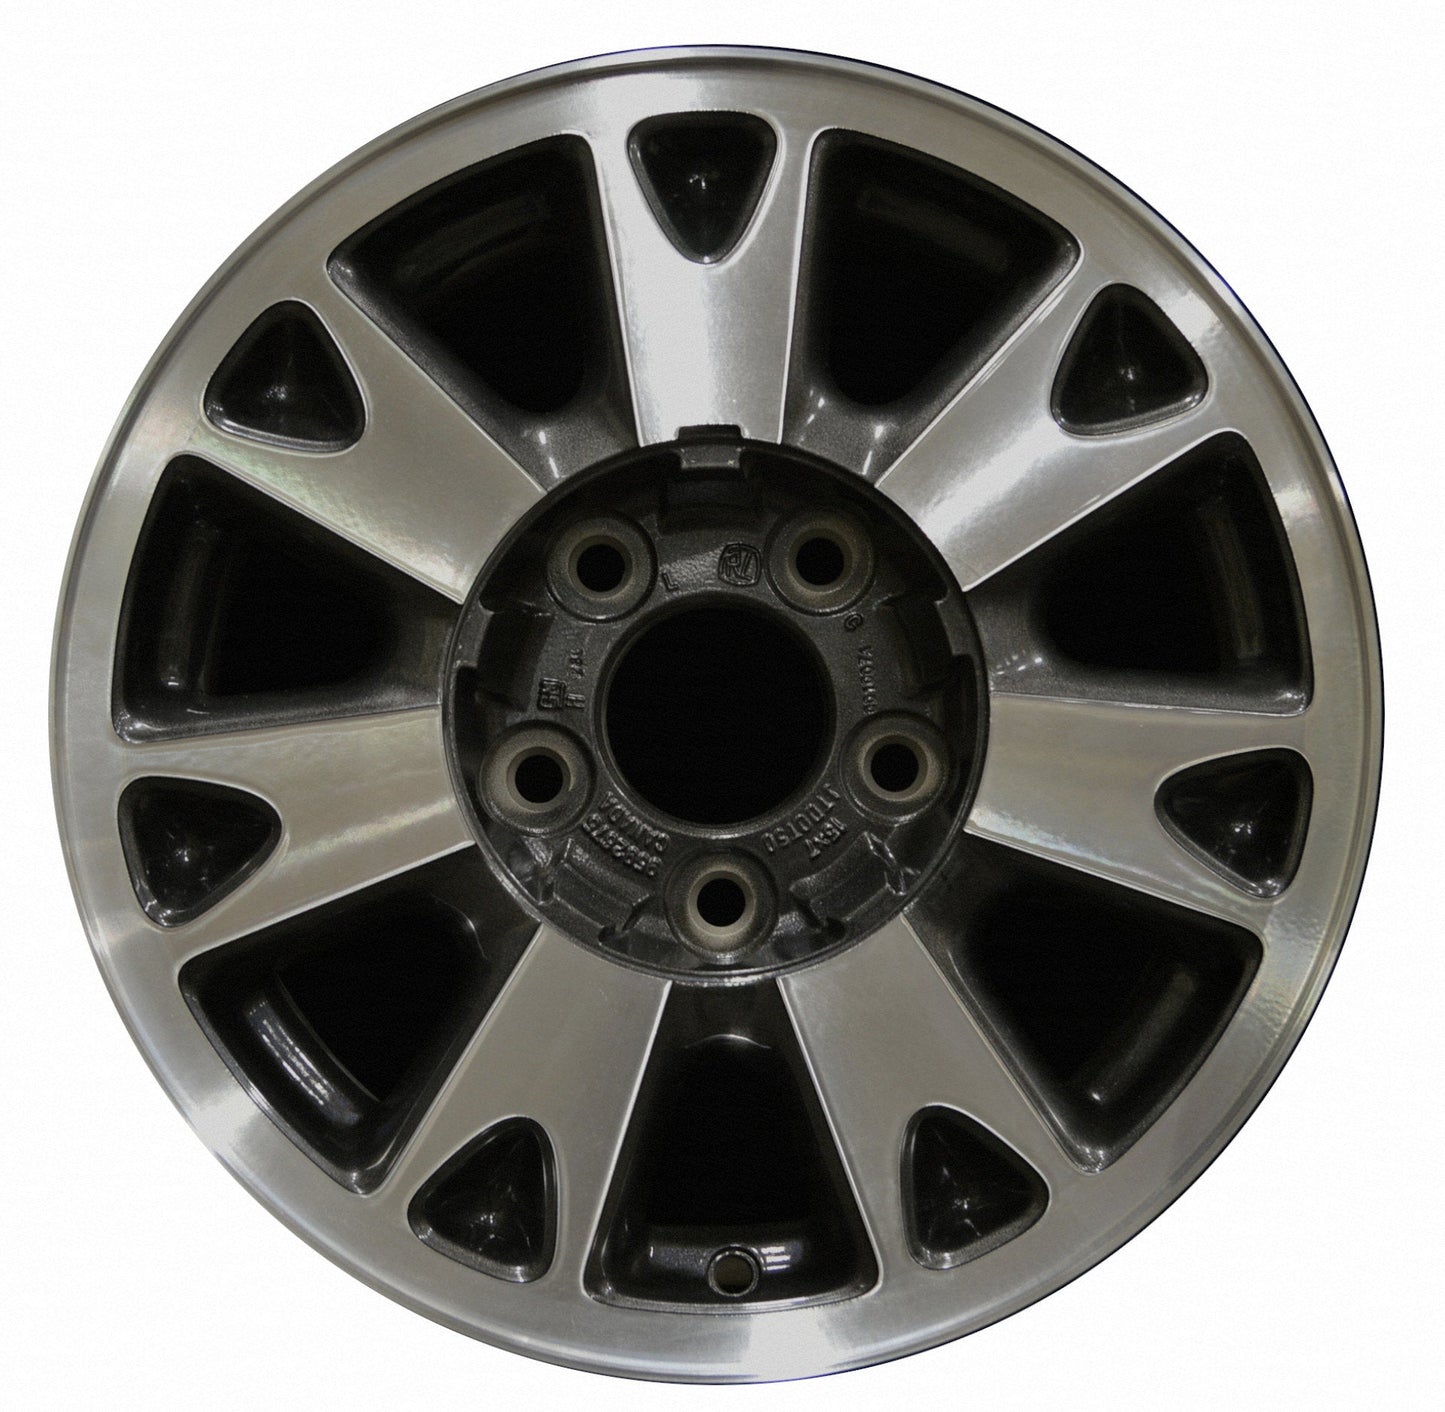 Chevrolet S10 Truck  1998, 1999, 2000, 2001, 2002, 2003, 2004 Factory OEM Car Wheel Size 15x7 Alloy WAO.5064.LC12.MA